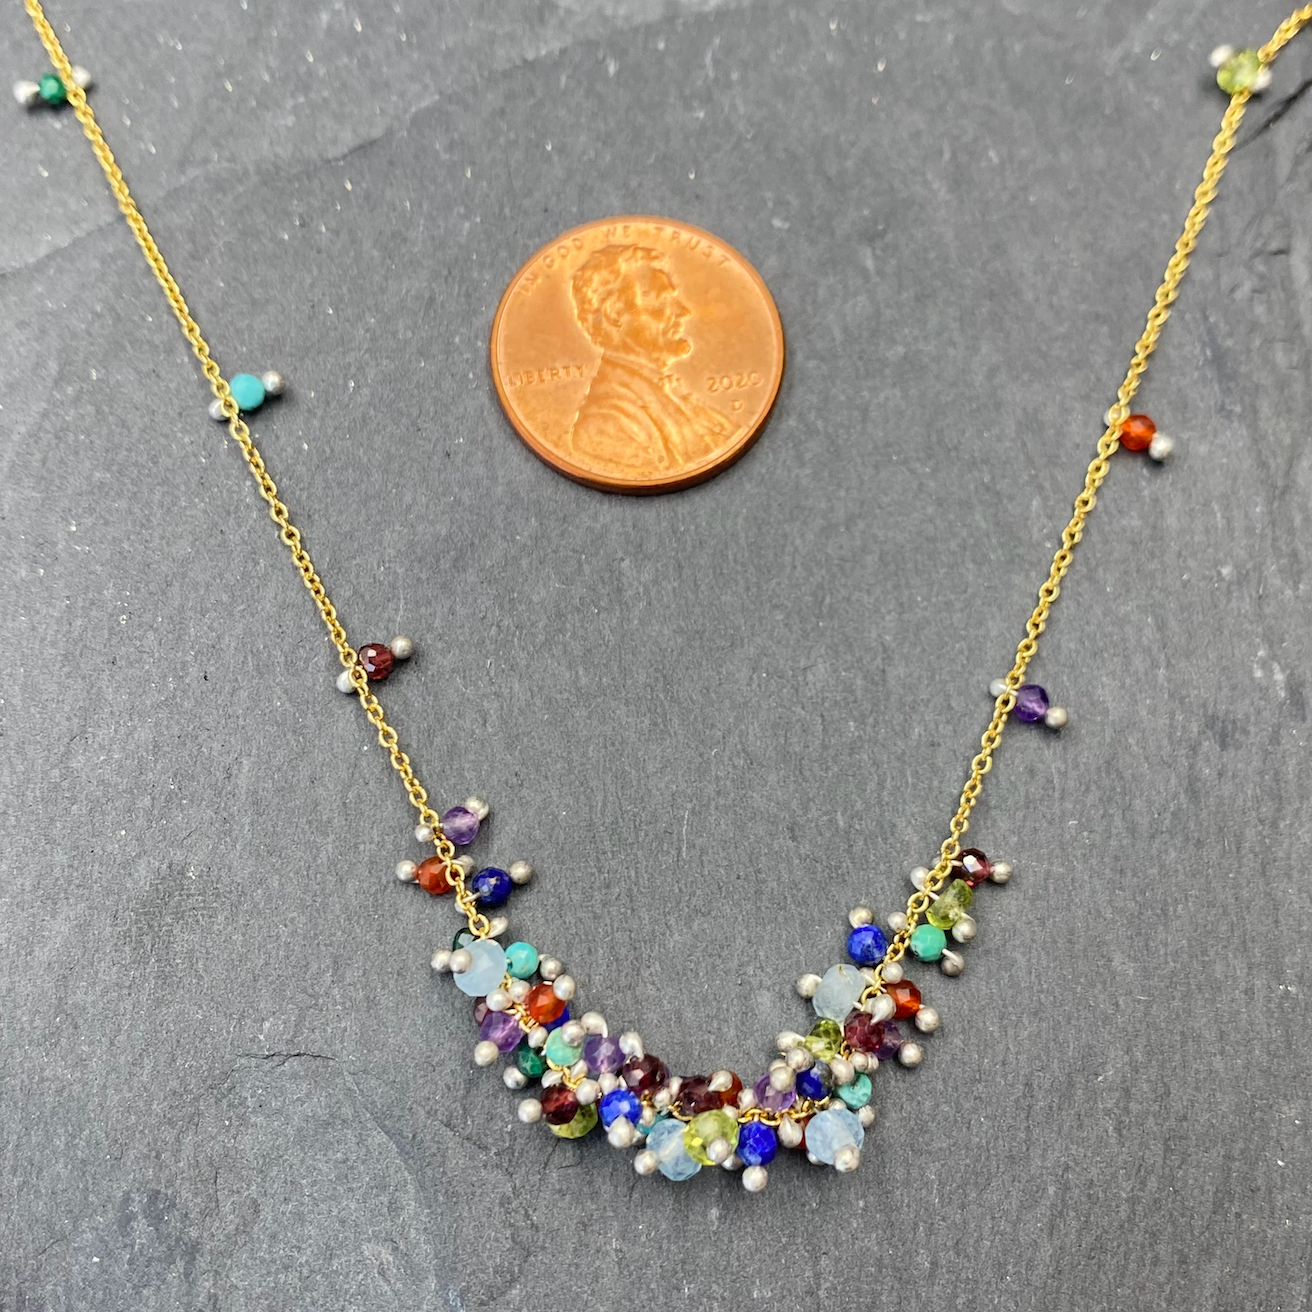 Colorful Clustered Wisteria Necklace